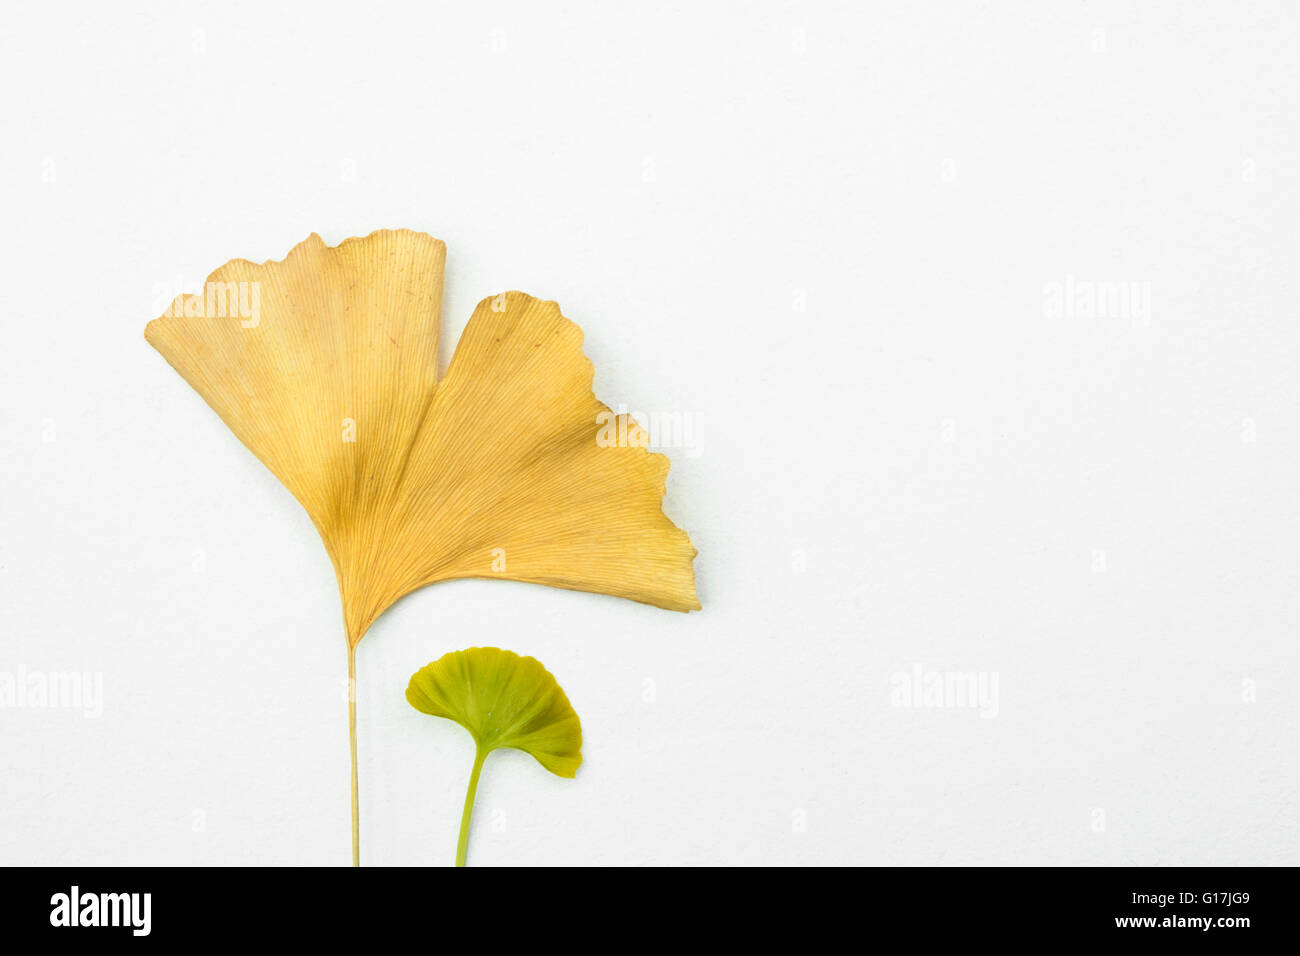 Old dried yellow Ginkgo leaf accompanied by a little young green Ginkgo leaf on an isolated white background. It represents the Stock Photo